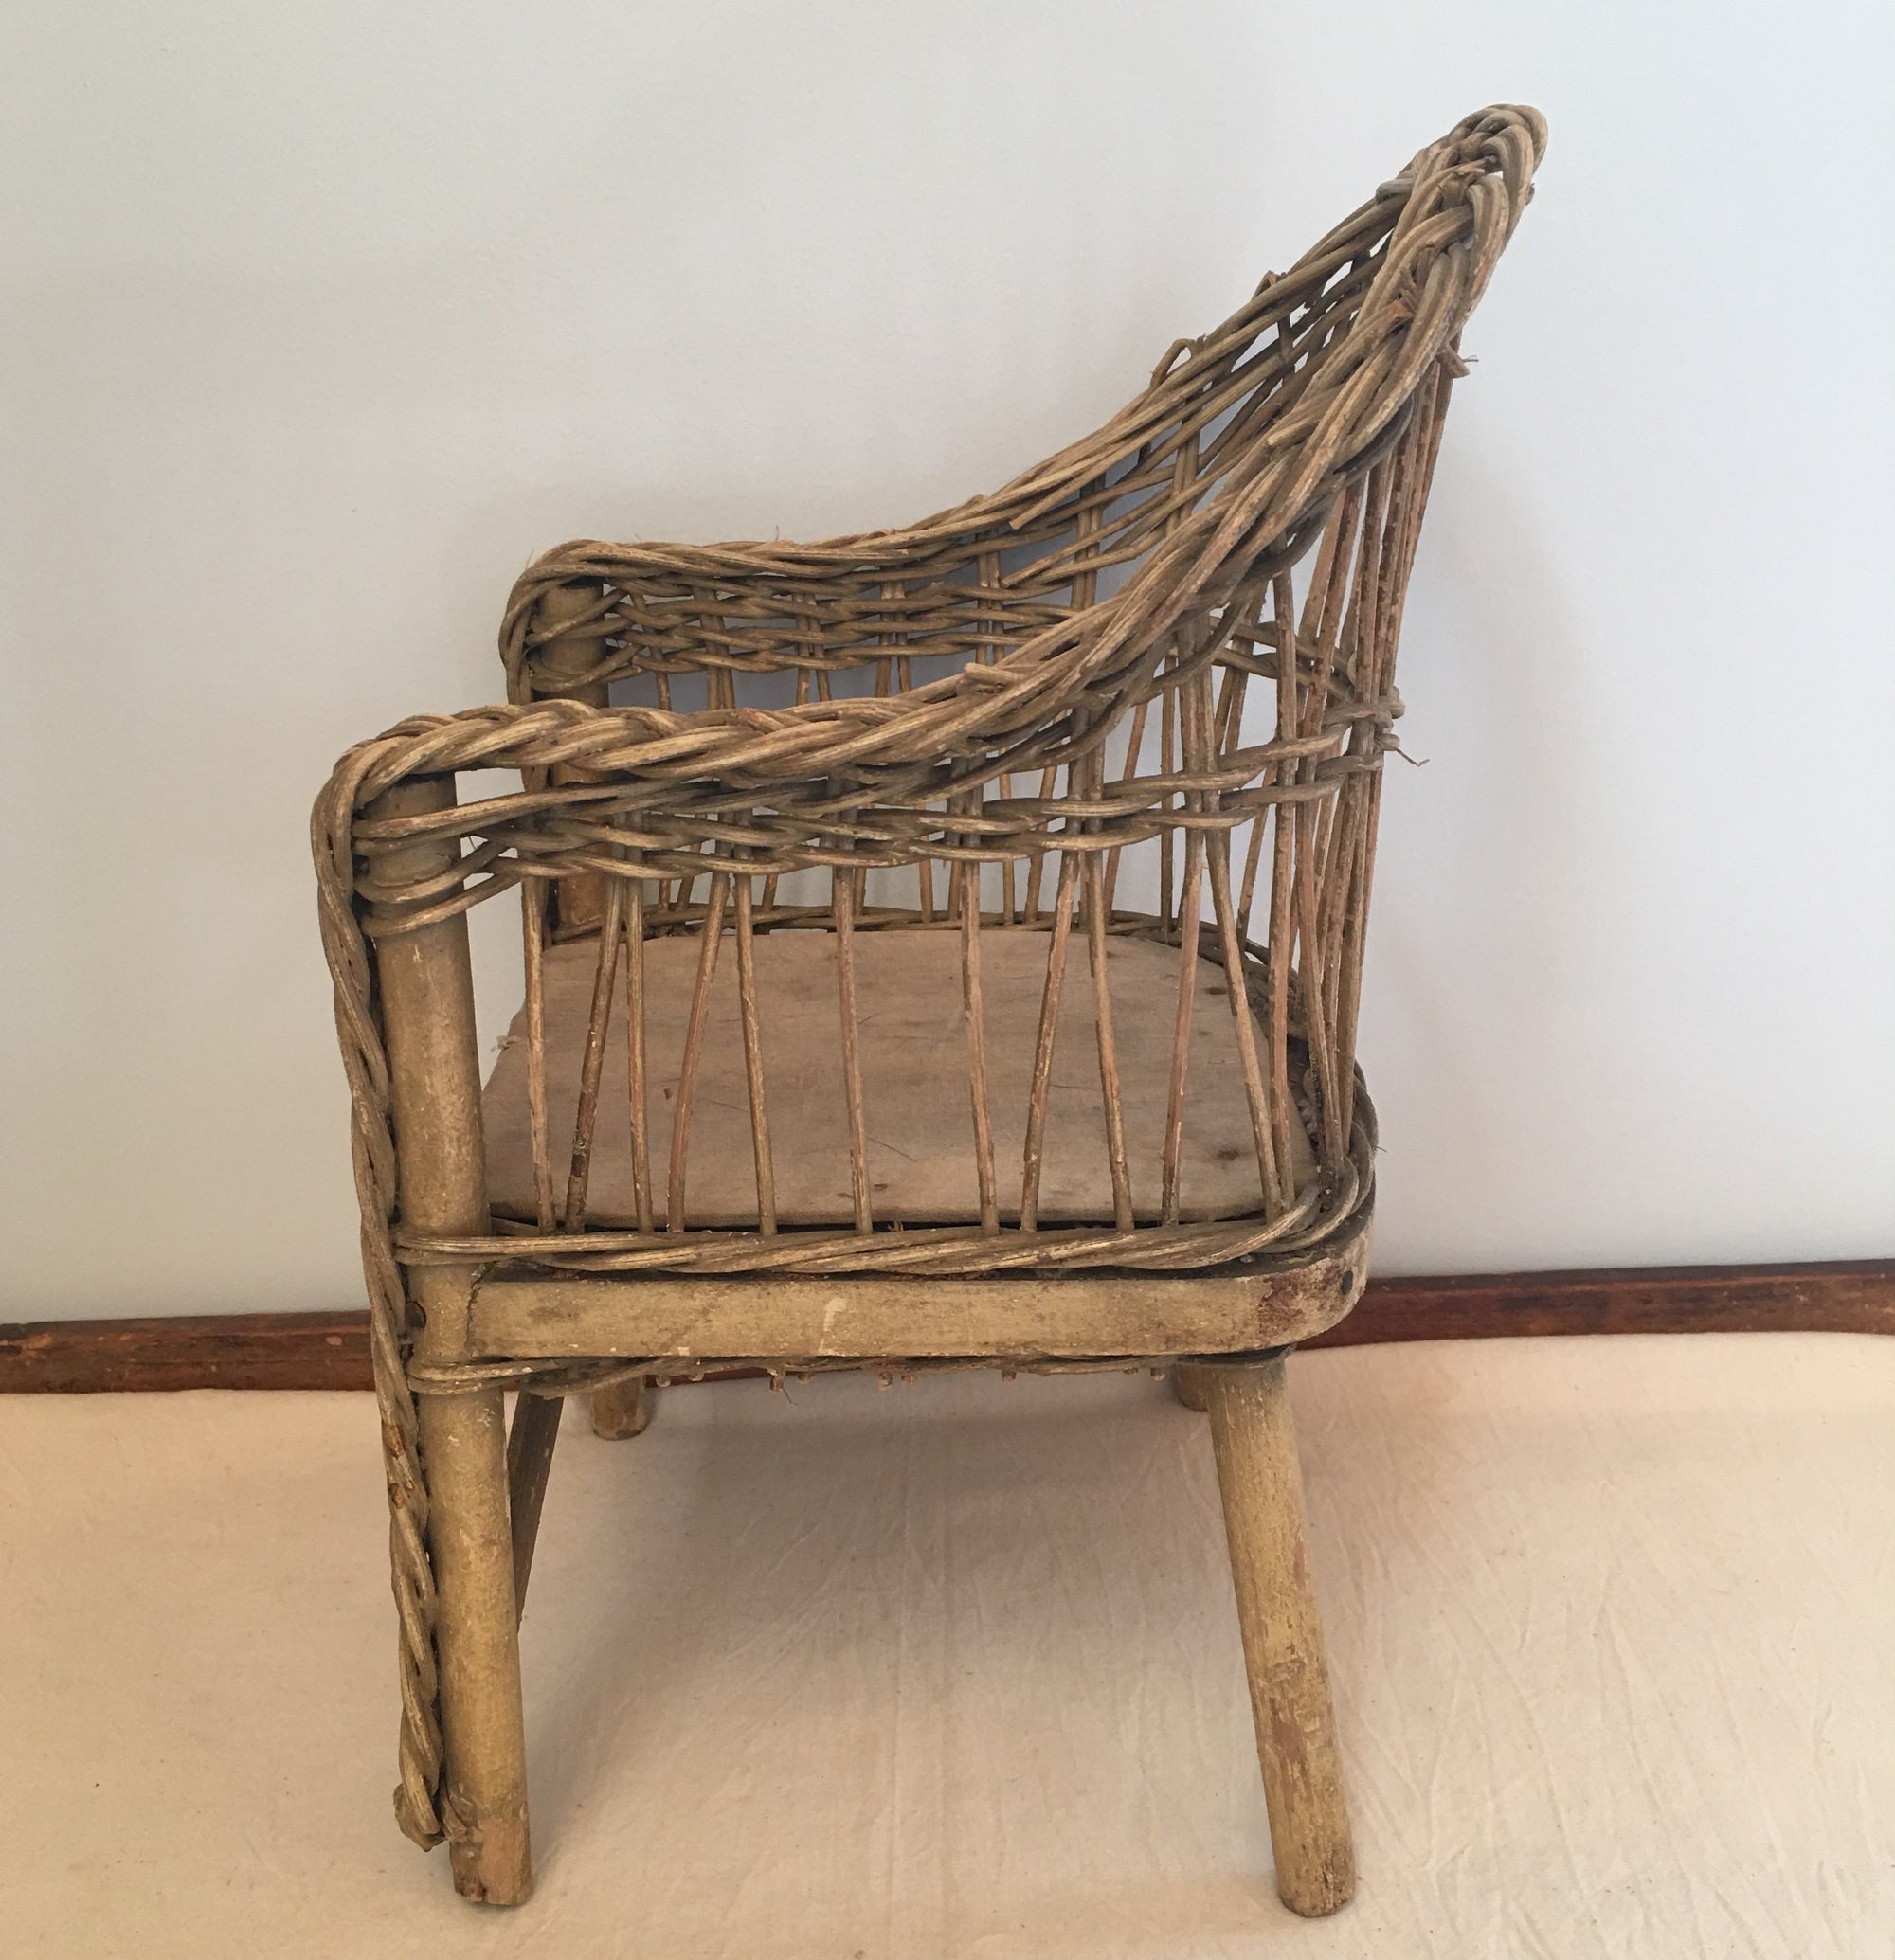 1920’s Small Wicker Chair with Silk Chair Pad